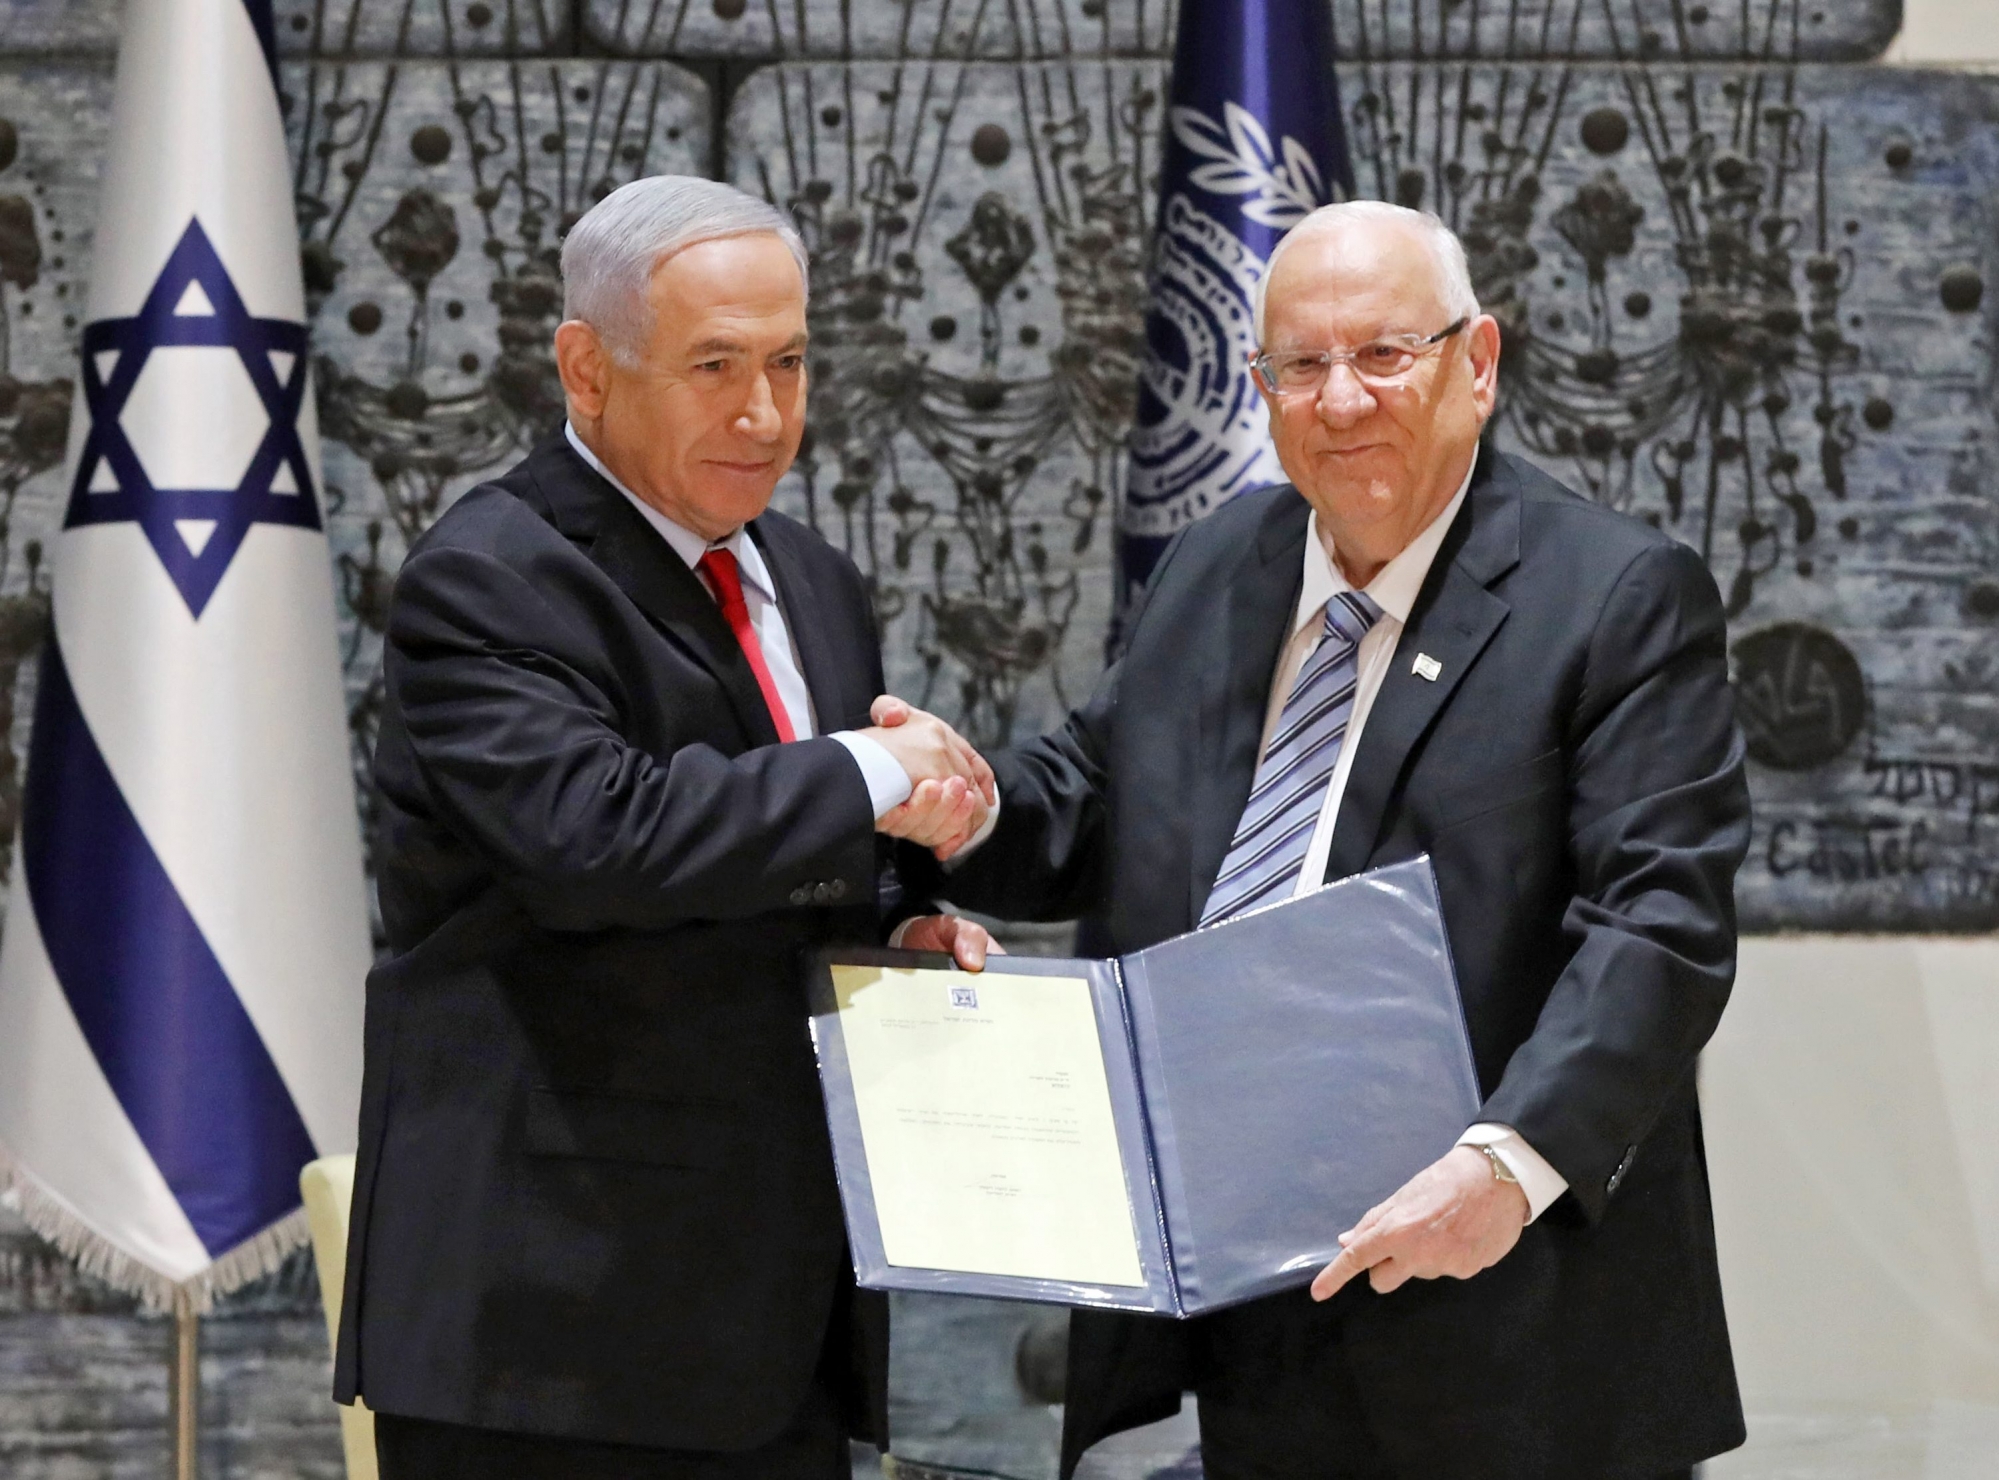 epa07512646 Israeli President Reuven Rivlin (R) hands a letter of appointment for entrusted with forming the next government to Israeli Prime Minister and Chairman of the Likud Party Benjamin Netanyahu (L) at the President's residence in Jerusalem, Israel, 17 April 2019. Benjamin Netanyahu won the 09 April elections and will soon form his government. Netanyahu will enter his fifth term as Prime Minister of Israel.  EPA/ABIR SULTAN ISRAEL PARLIAMENT ELECTIONS